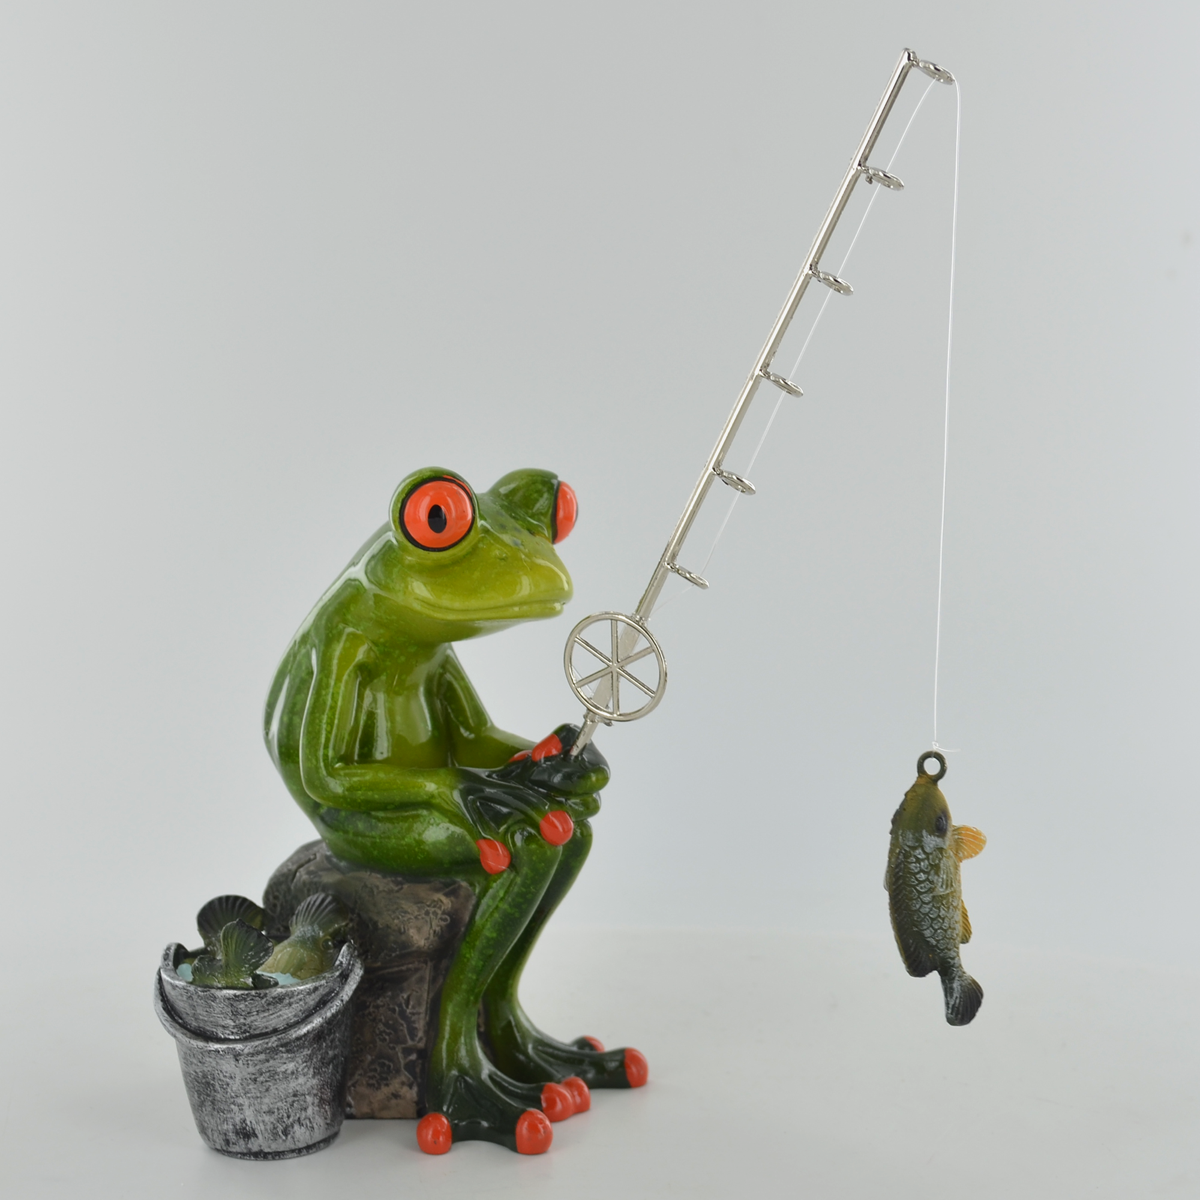 Comical Frog Ornament - Reel them in